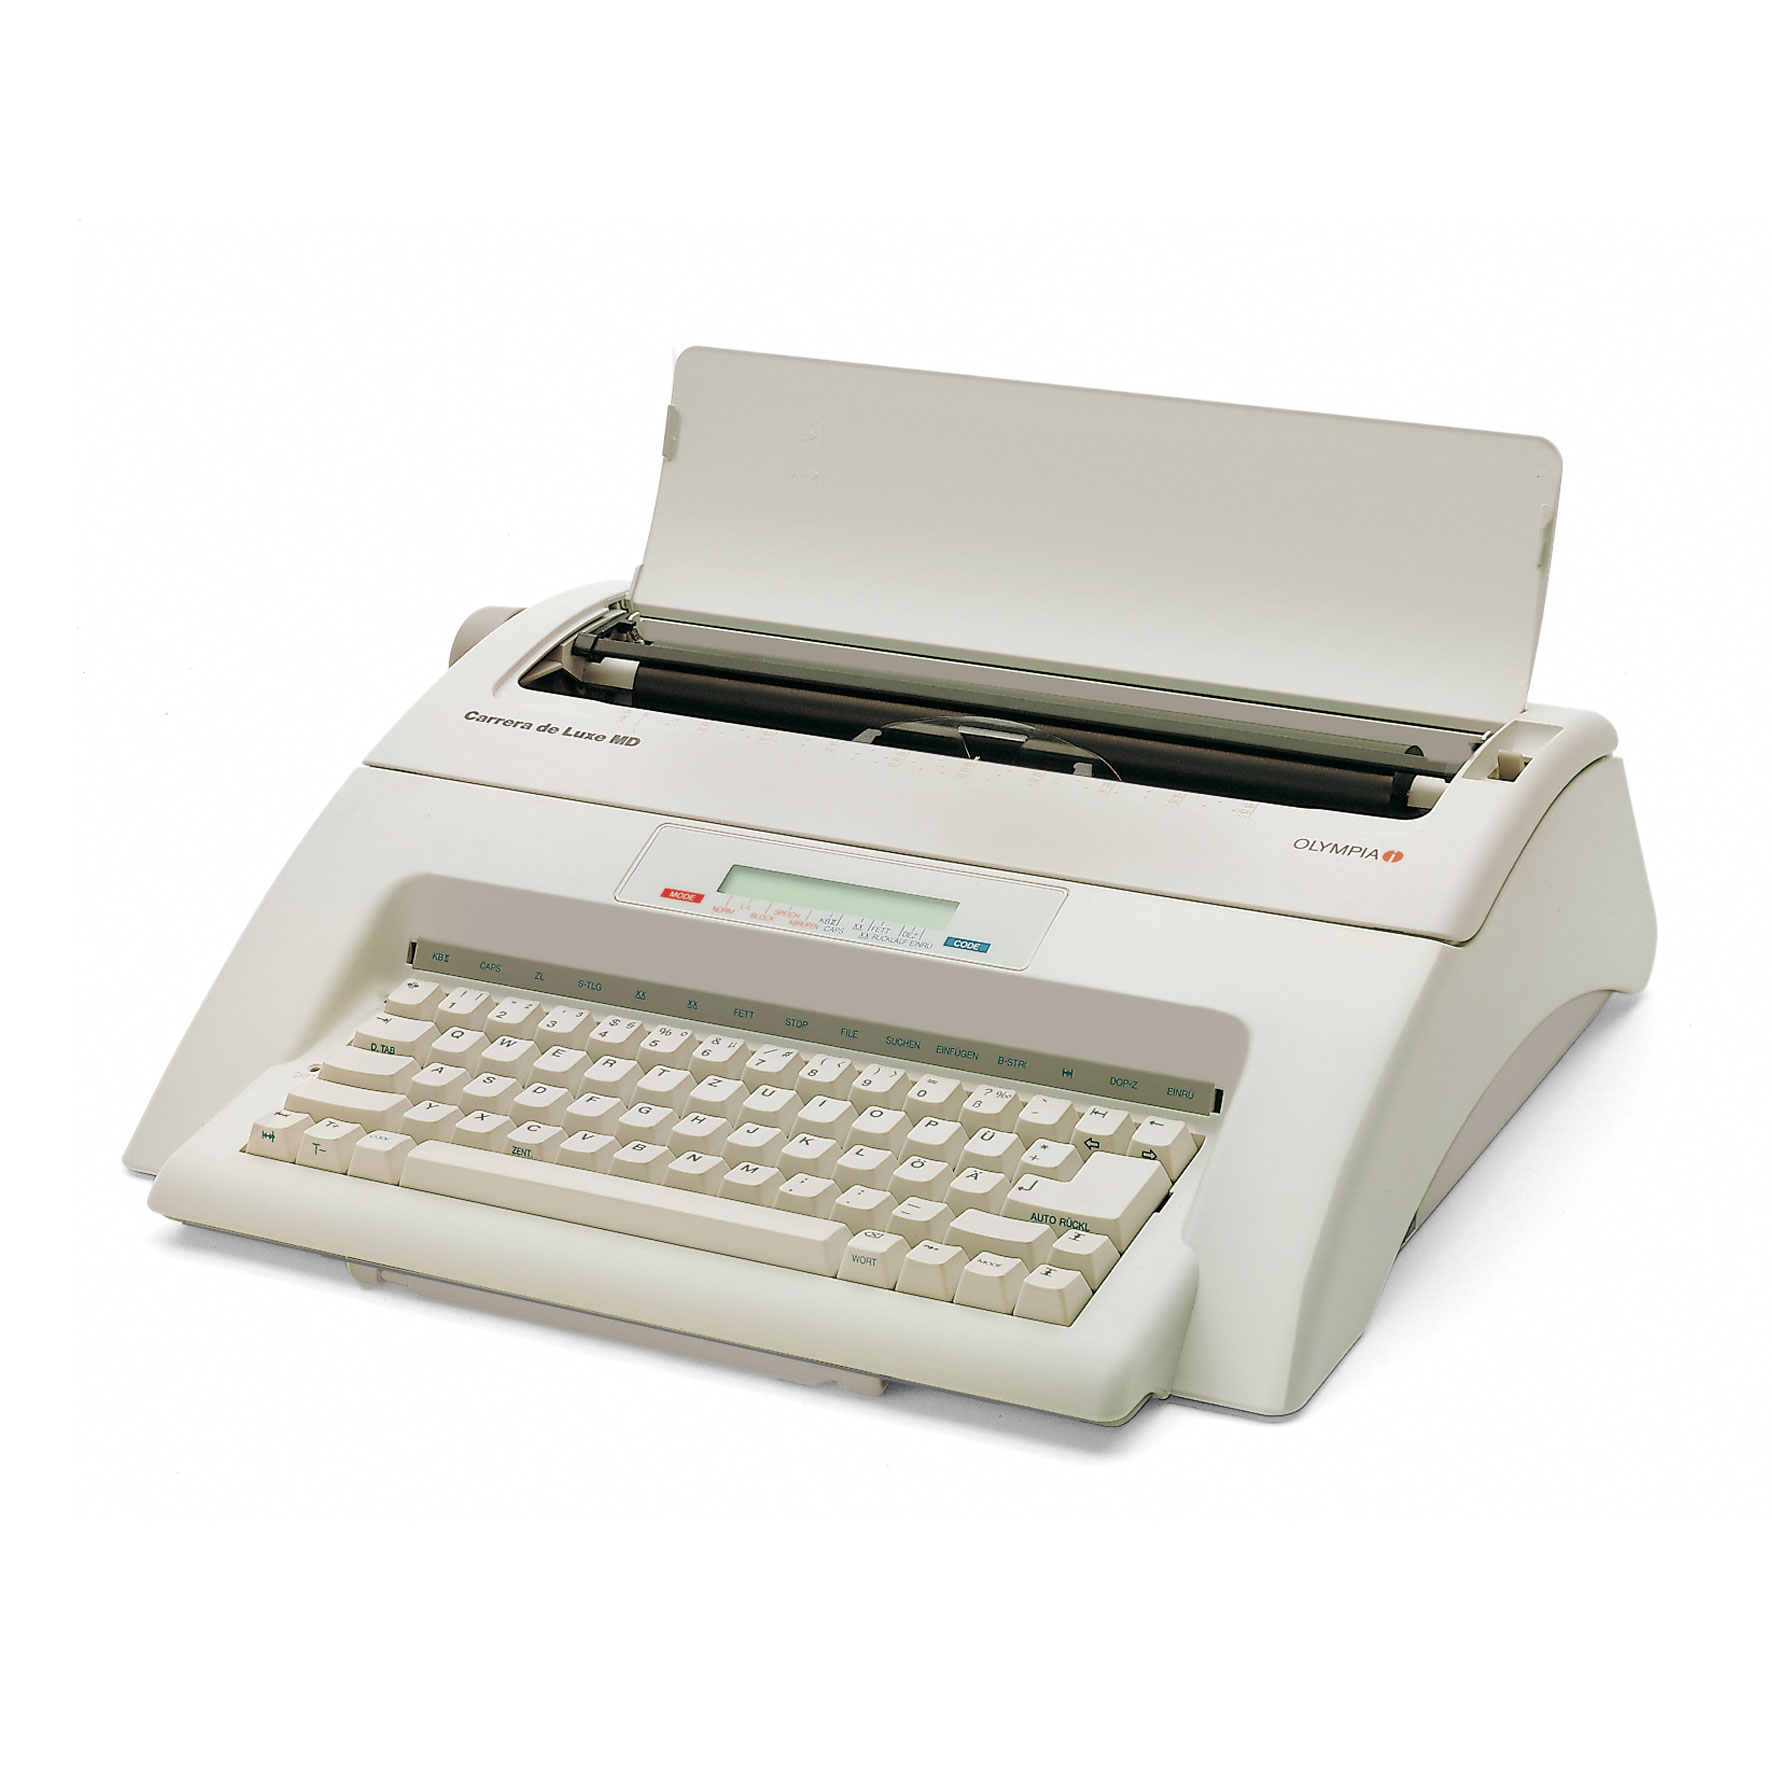 Typewriter Carrera de luxe MD | Olympia Business Systems